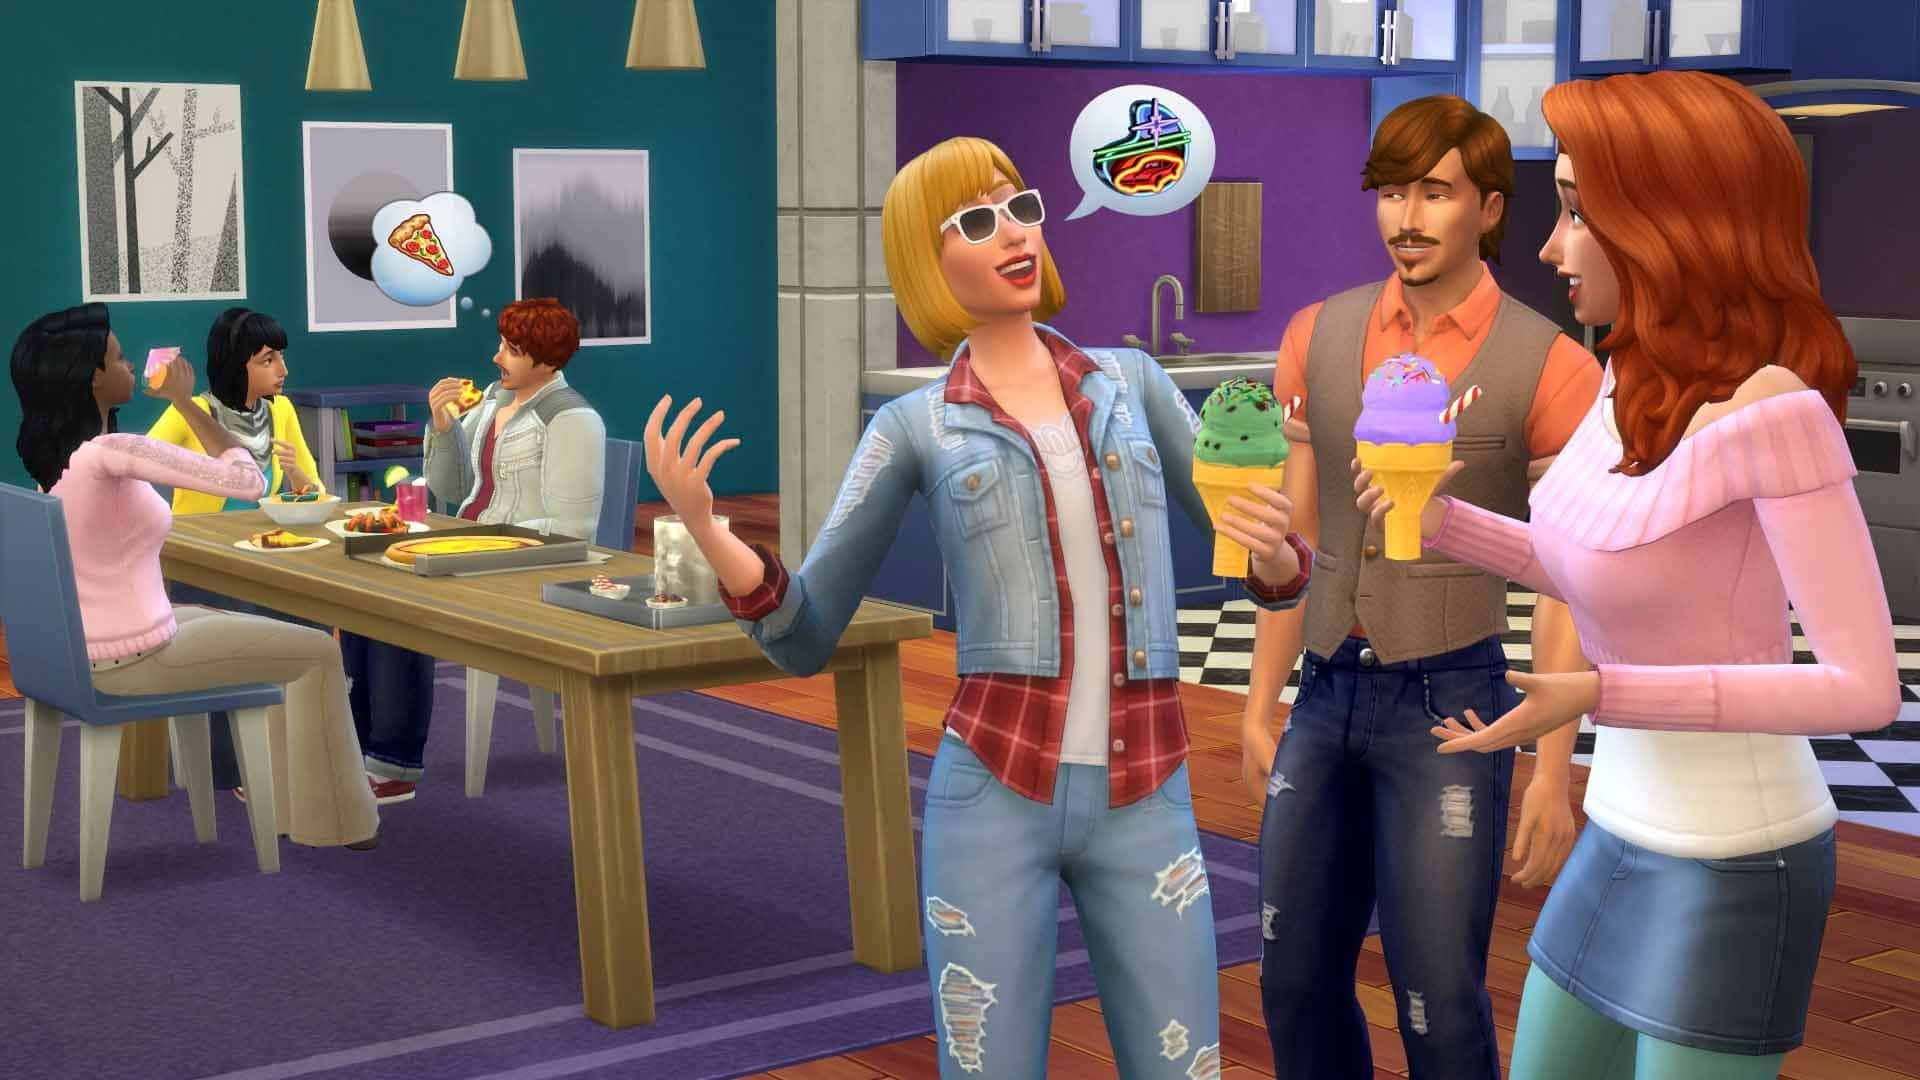 MONEY CHEAT FOR THE SIMS 4 ON PS4 & PS5 - 2021 